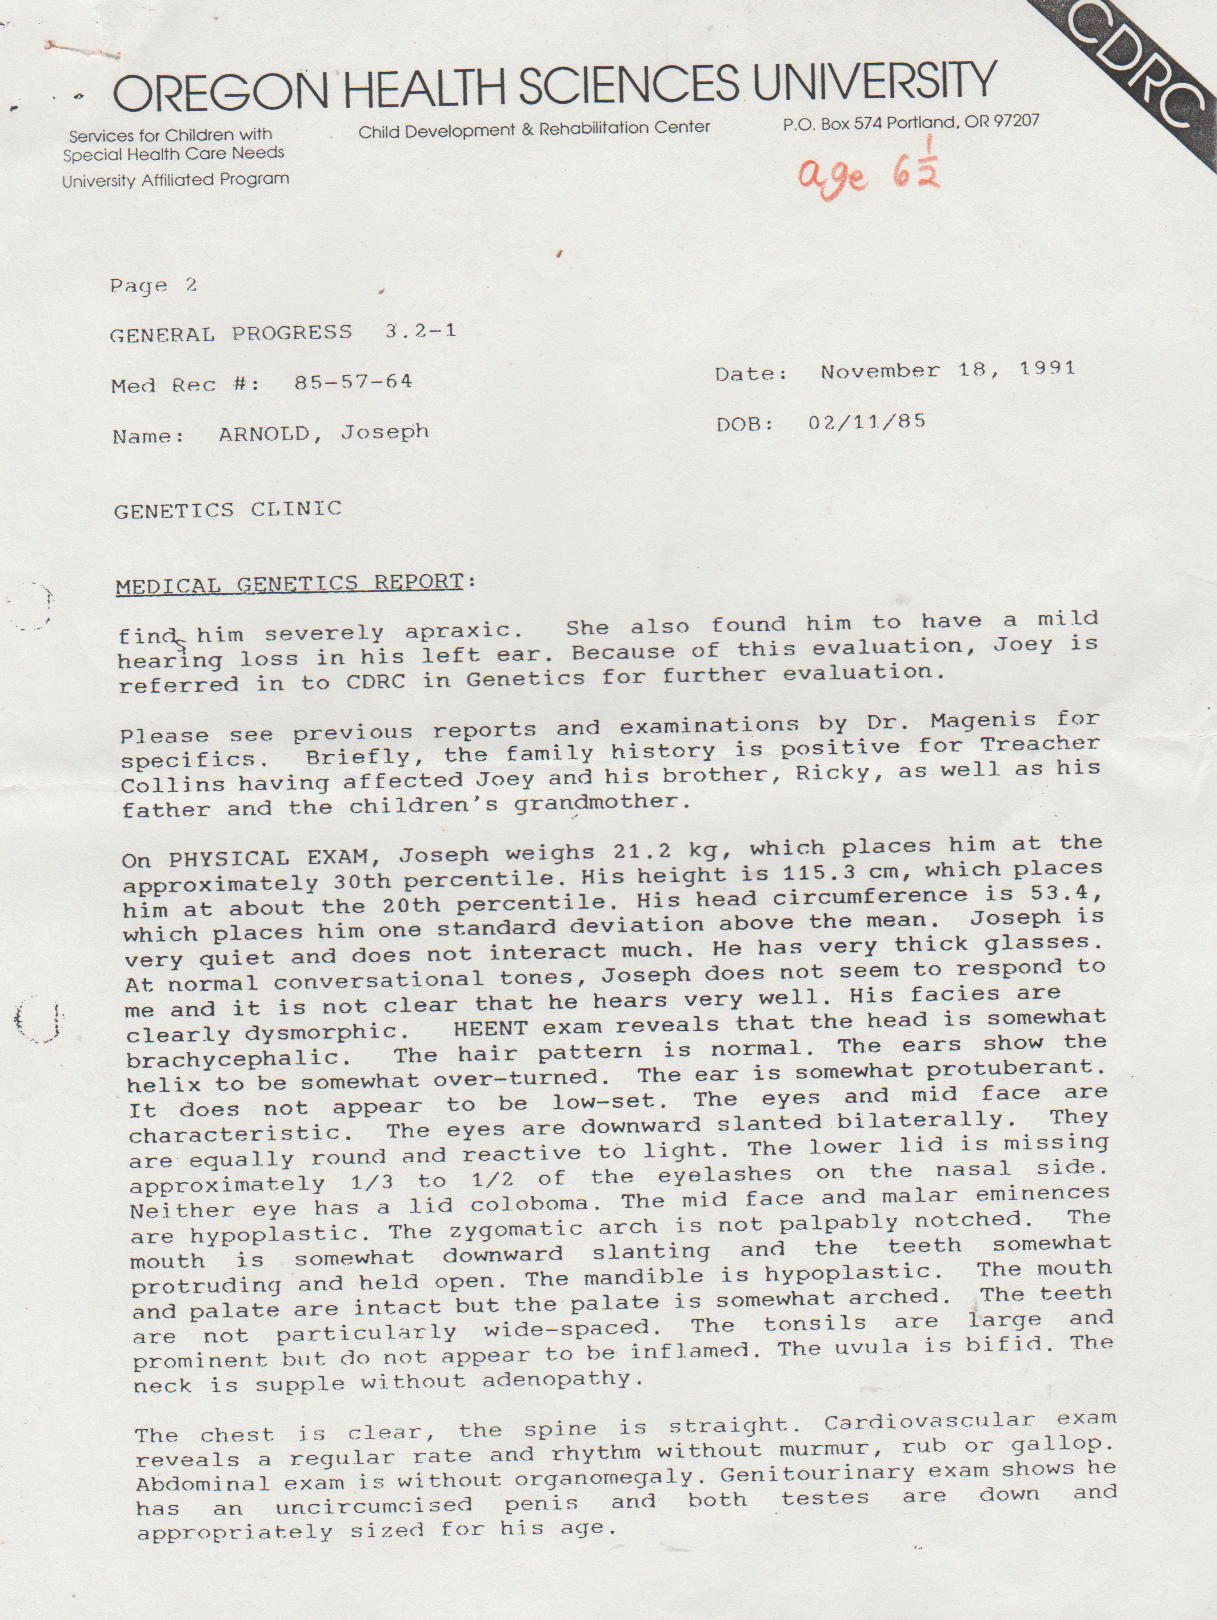 1991-11-18 - Monday - Evaluation of Joey Arnold by some MDs - Oregon Health Sciences University, Portland, OR - 4pages-2.png